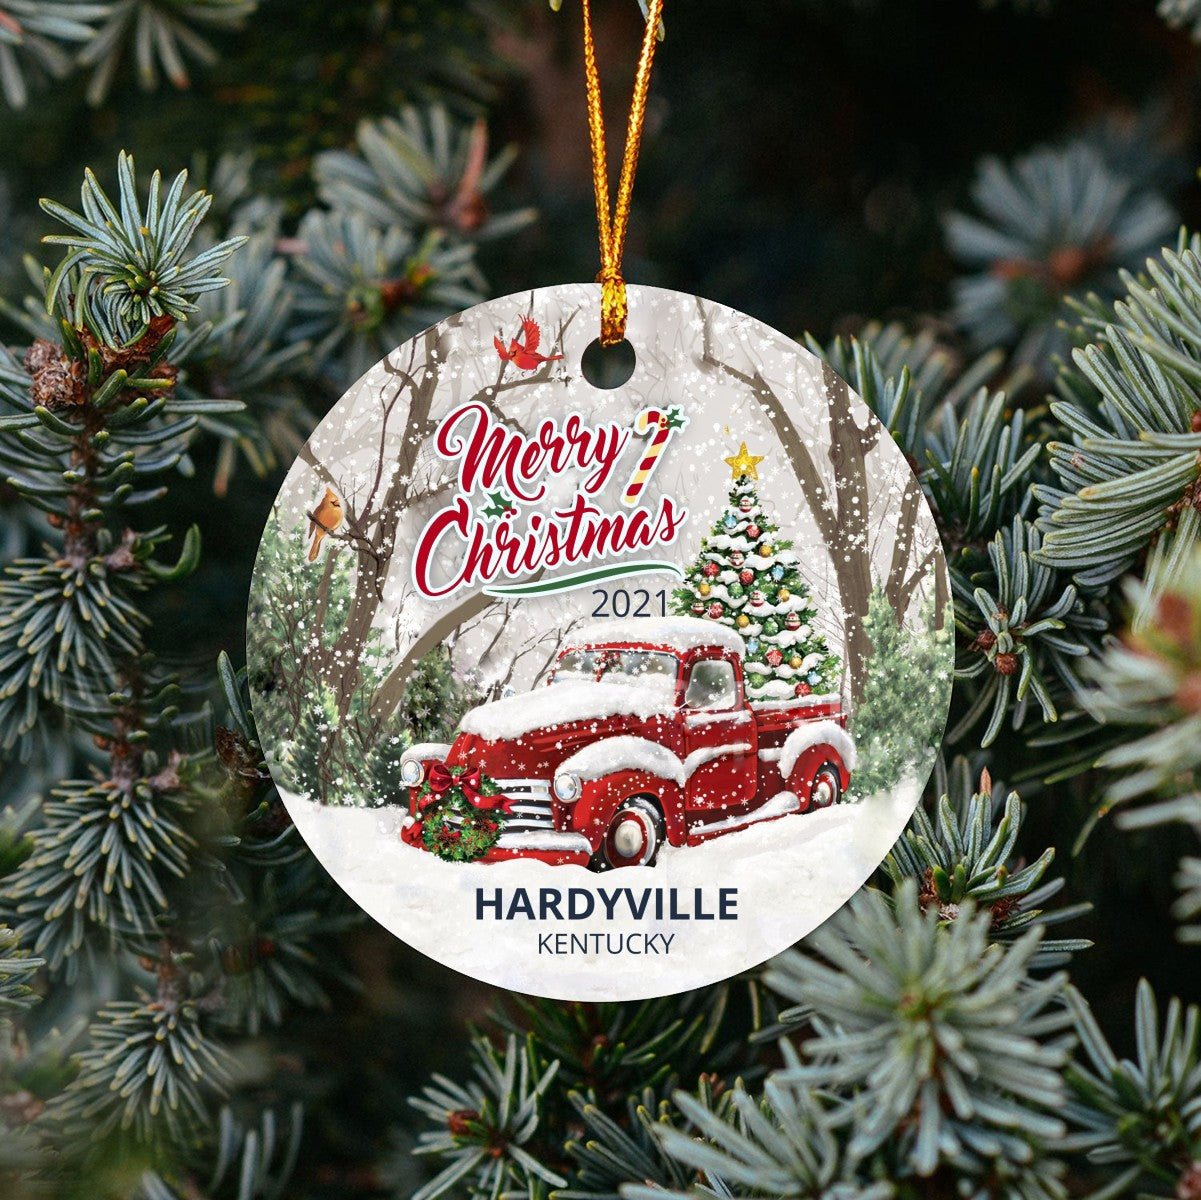 Christmas Tree Ornaments Hardyville - Ornament Customize With Name City And State Hardyville Kentucky KY - Red Truck Xmas Ornaments 3'' Plastic Gift For Family, Friend And Housewarming